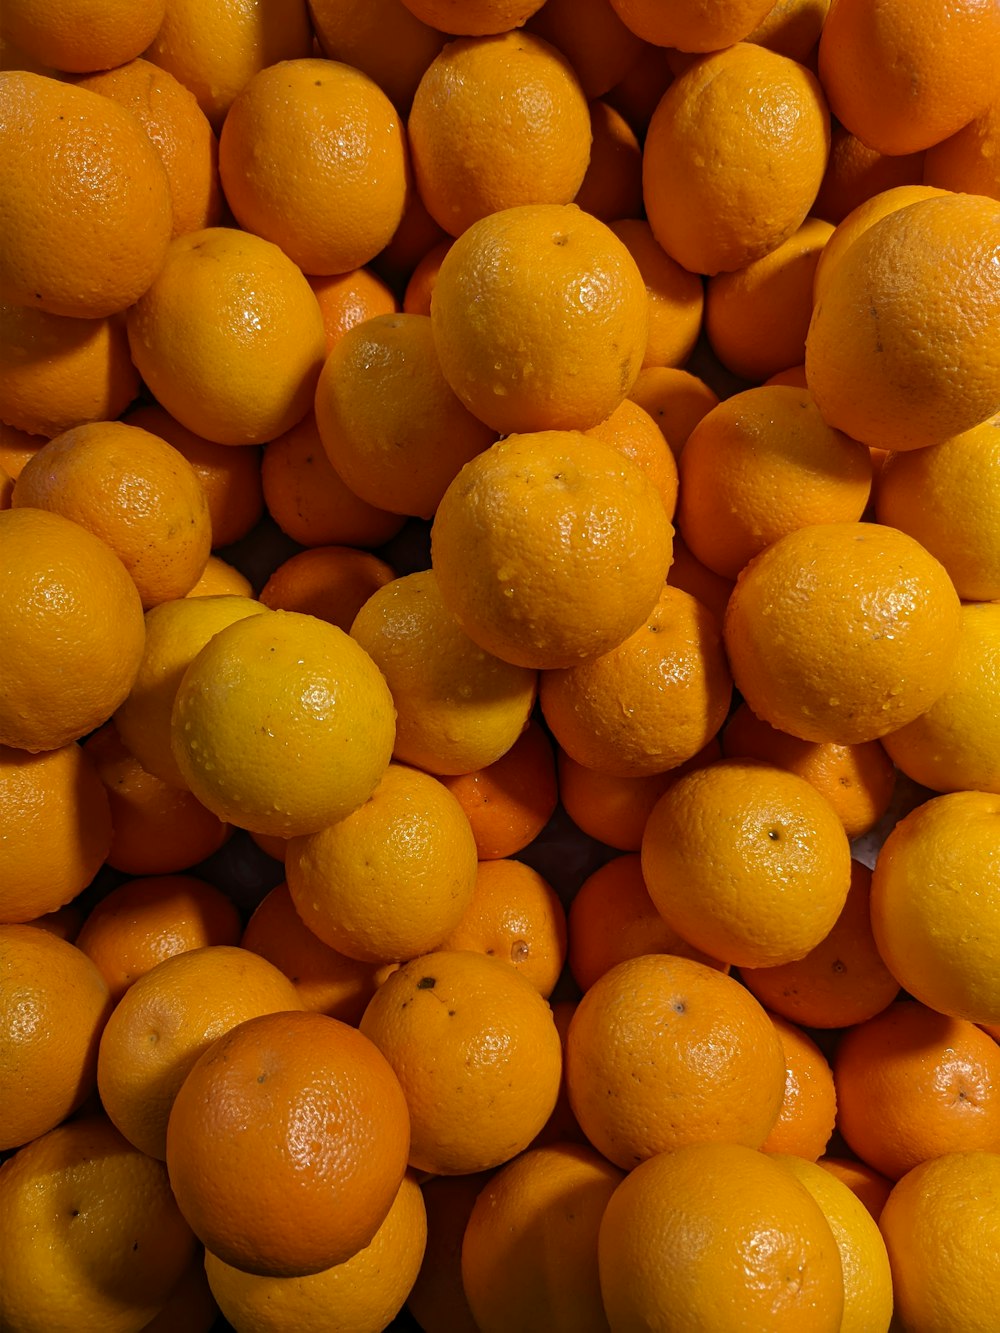 a pile of oranges sitting next to each other